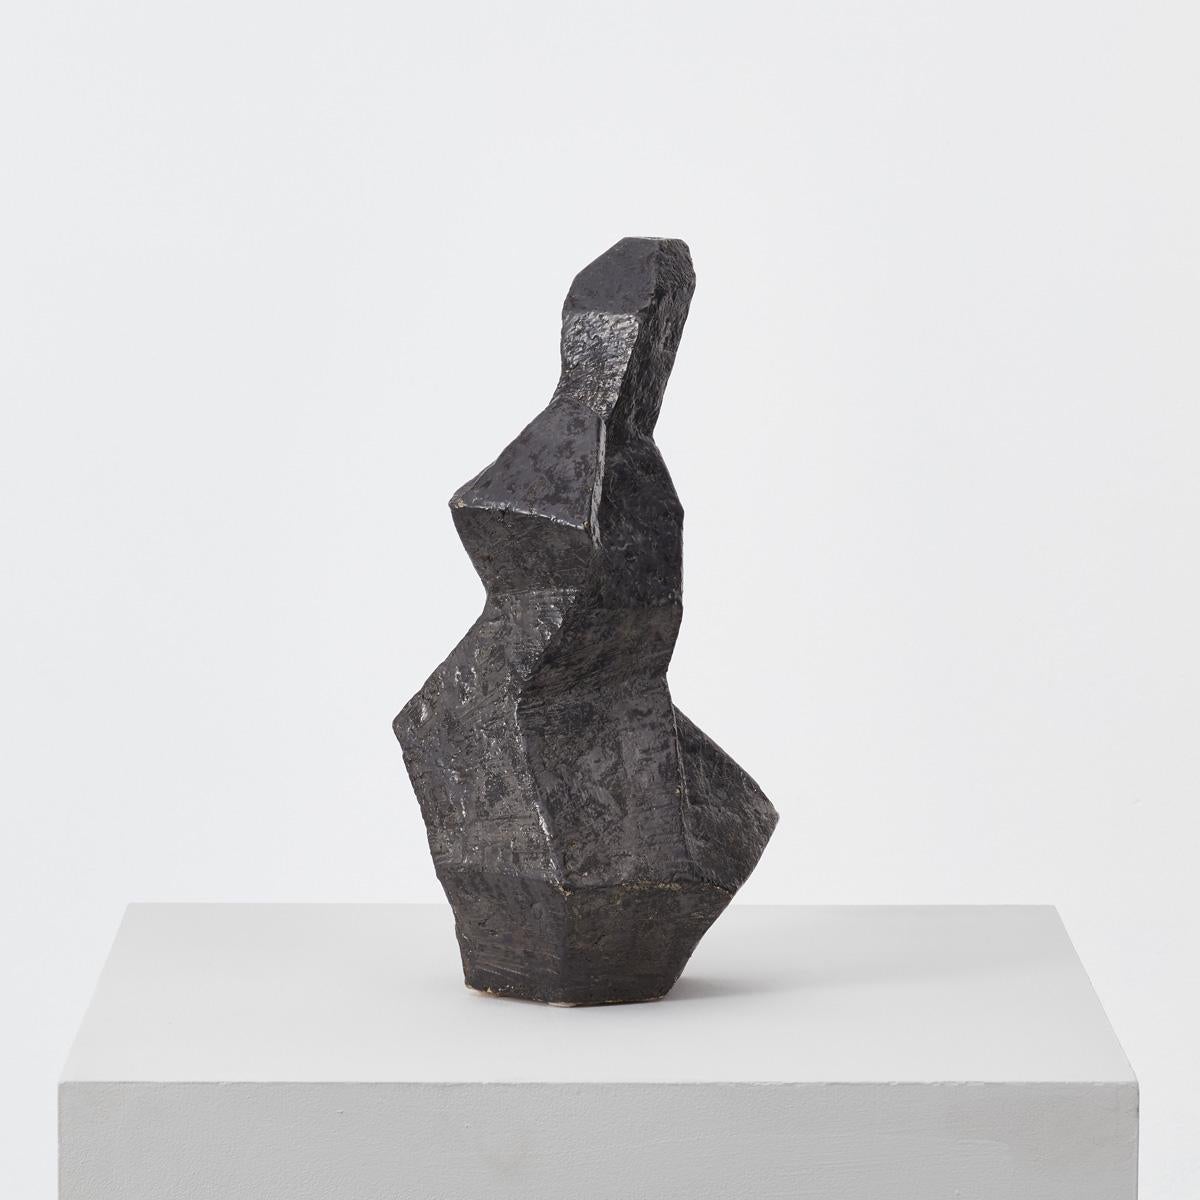 This abstract sculptural work resembles an anthroposophic figure. The disjointed ceramic sculpture has a rough surface and is finished in black glaze, with small peaks of the white underglaze peaking through. Its aesthetic is on point today, fitting